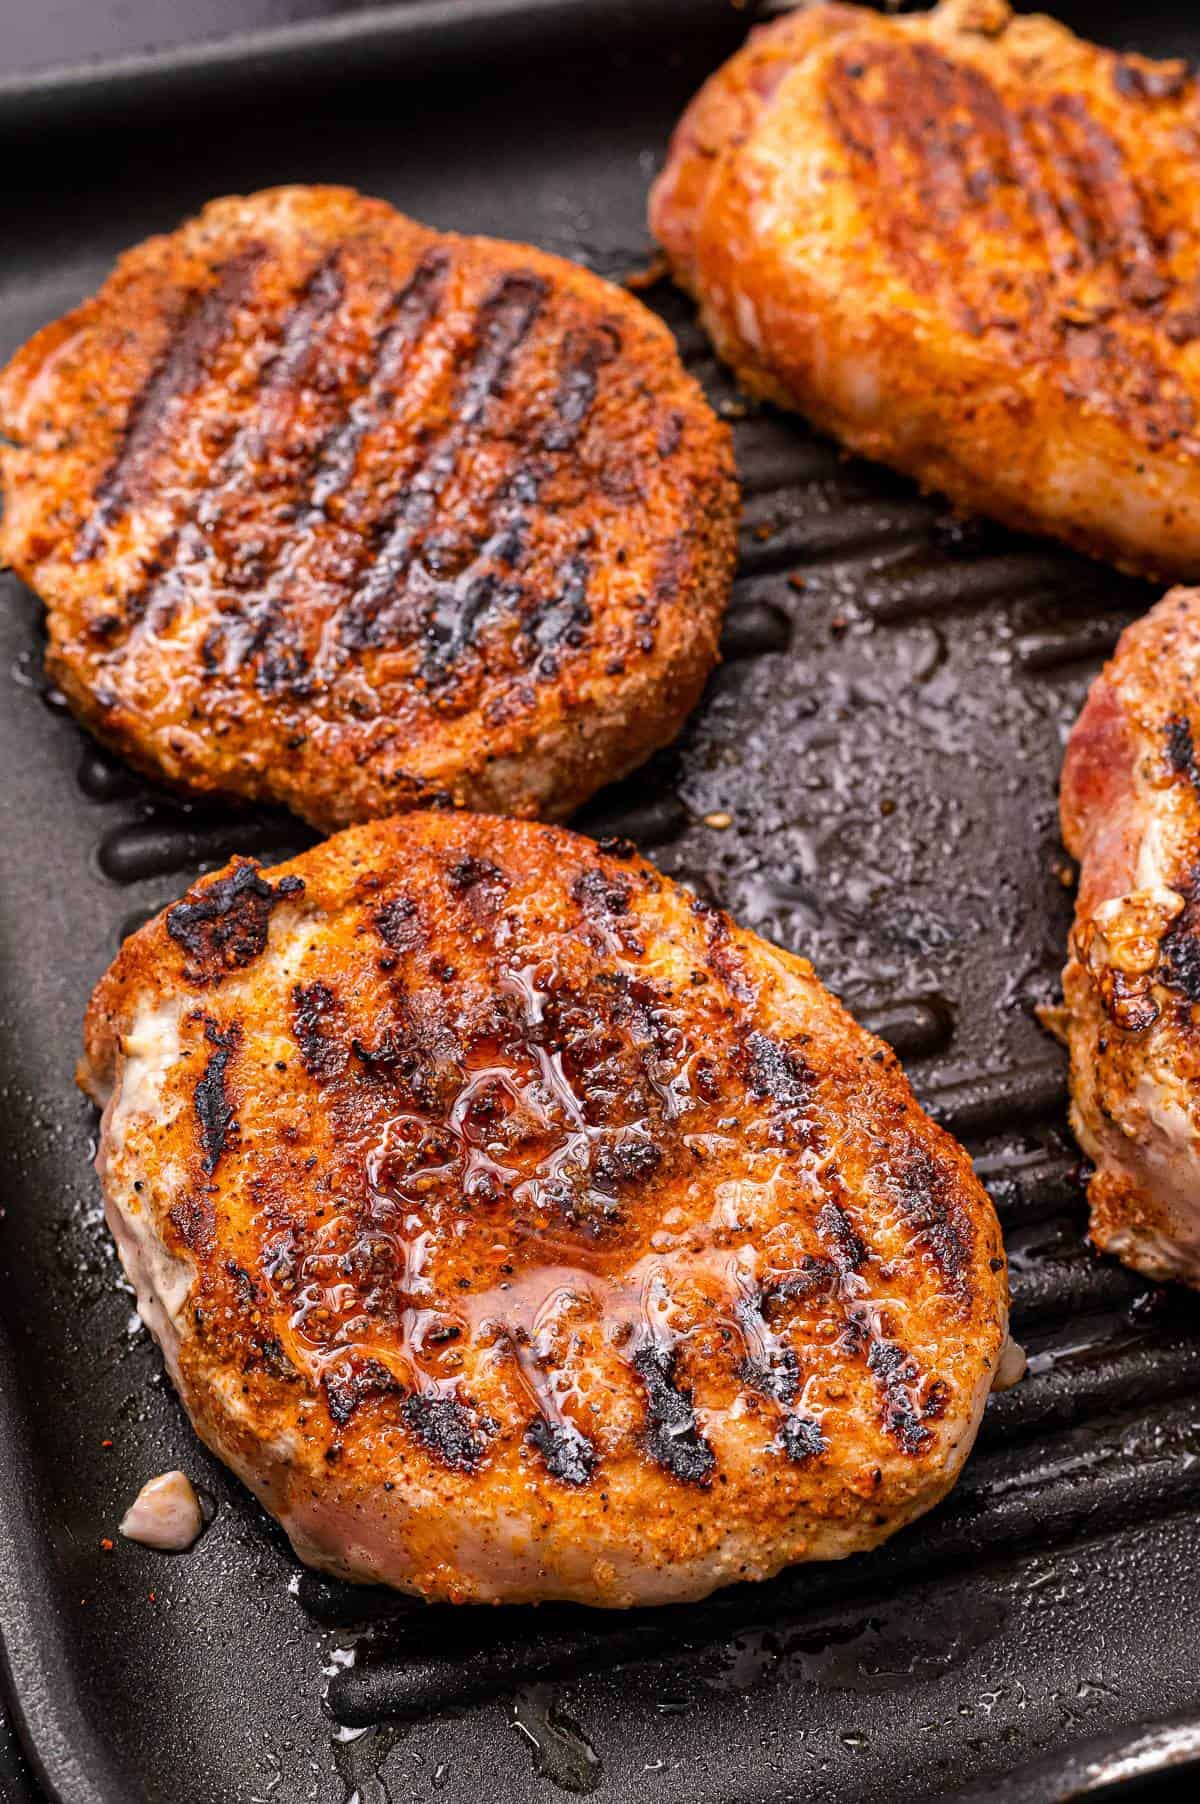 A grill pan with seasoned pork chops on it